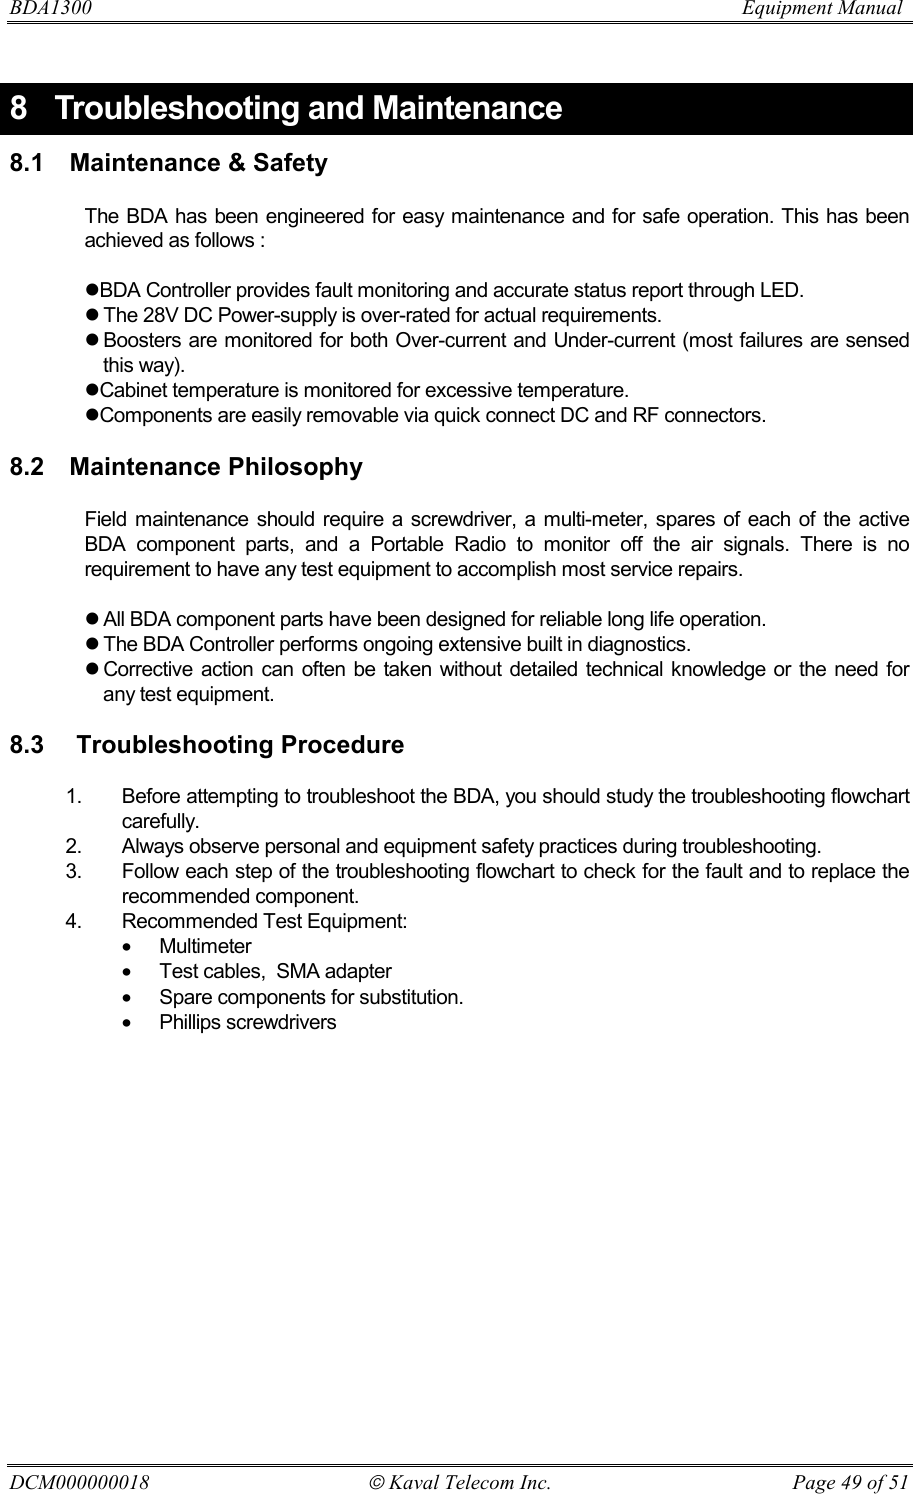 BDA1300                          Equipment Manual DCM000000018  Kaval Telecom Inc.  Page 49 of 51 8  Troubleshooting and Maintenance 8.1  Maintenance &amp; Safety  The BDA has been engineered for easy maintenance and for safe operation. This has been achieved as follows :  !BDA Controller provides fault monitoring and accurate status report through LED.  ! The 28V DC Power-supply is over-rated for actual requirements. ! Boosters are monitored for both Over-current and Under-current (most failures are sensed this way). !Cabinet temperature is monitored for excessive temperature. !Components are easily removable via quick connect DC and RF connectors.  8.2 Maintenance Philosophy  Field maintenance should require a screwdriver, a multi-meter, spares of each of the active BDA component parts, and a Portable Radio to monitor off the air signals. There is no requirement to have any test equipment to accomplish most service repairs.  ! All BDA component parts have been designed for reliable long life operation. ! The BDA Controller performs ongoing extensive built in diagnostics. ! Corrective action can often be taken without detailed technical knowledge or the need for any test equipment.  8.3   Troubleshooting Procedure  1.  Before attempting to troubleshoot the BDA, you should study the troubleshooting flowchart carefully.   2.  Always observe personal and equipment safety practices during troubleshooting. 3.  Follow each step of the troubleshooting flowchart to check for the fault and to replace the recommended component. 4.  Recommended Test Equipment: •  Multimeter  •  Test cables,  SMA adapter •  Spare components for substitution. •  Phillips screwdrivers 